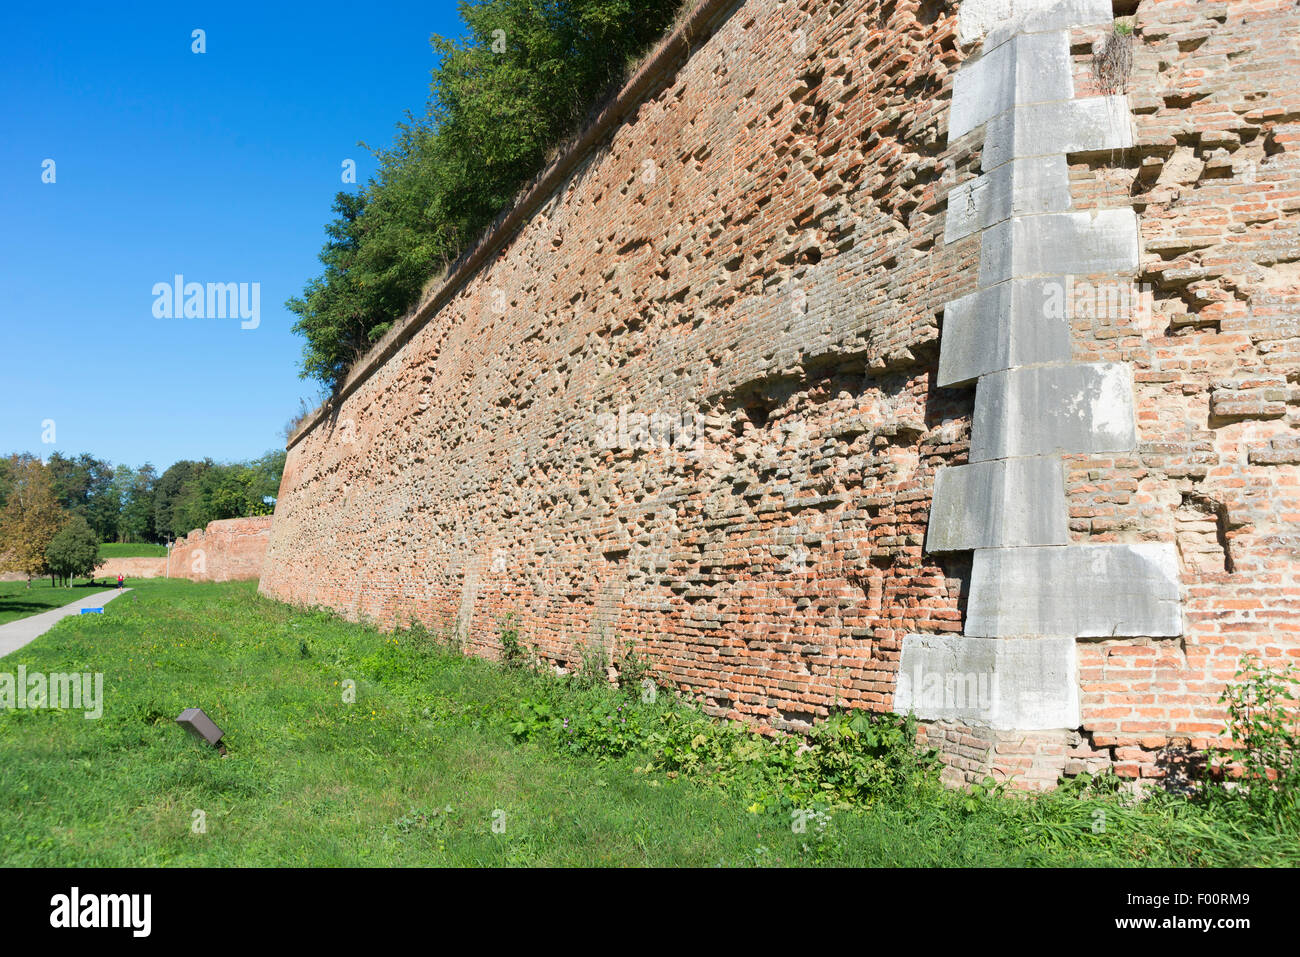 The old city walls in the medieval walled city of Ferrara in Northern Italy Stock Photo